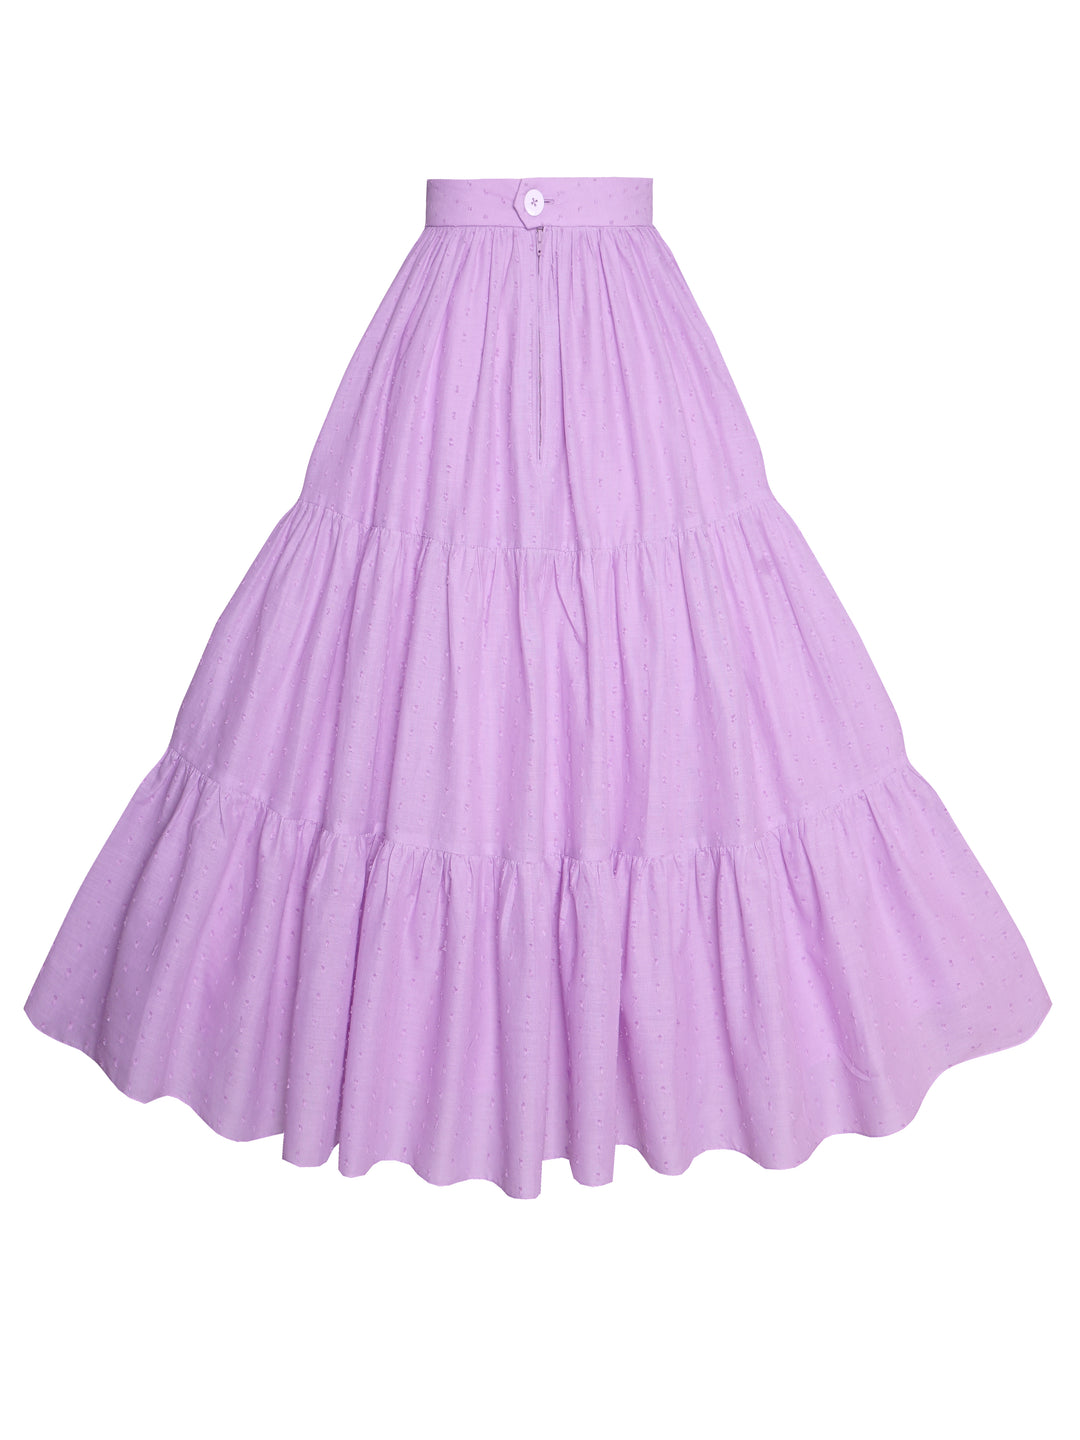 MTO - Pippa Skirt in Lavender "Dotted Swiss"